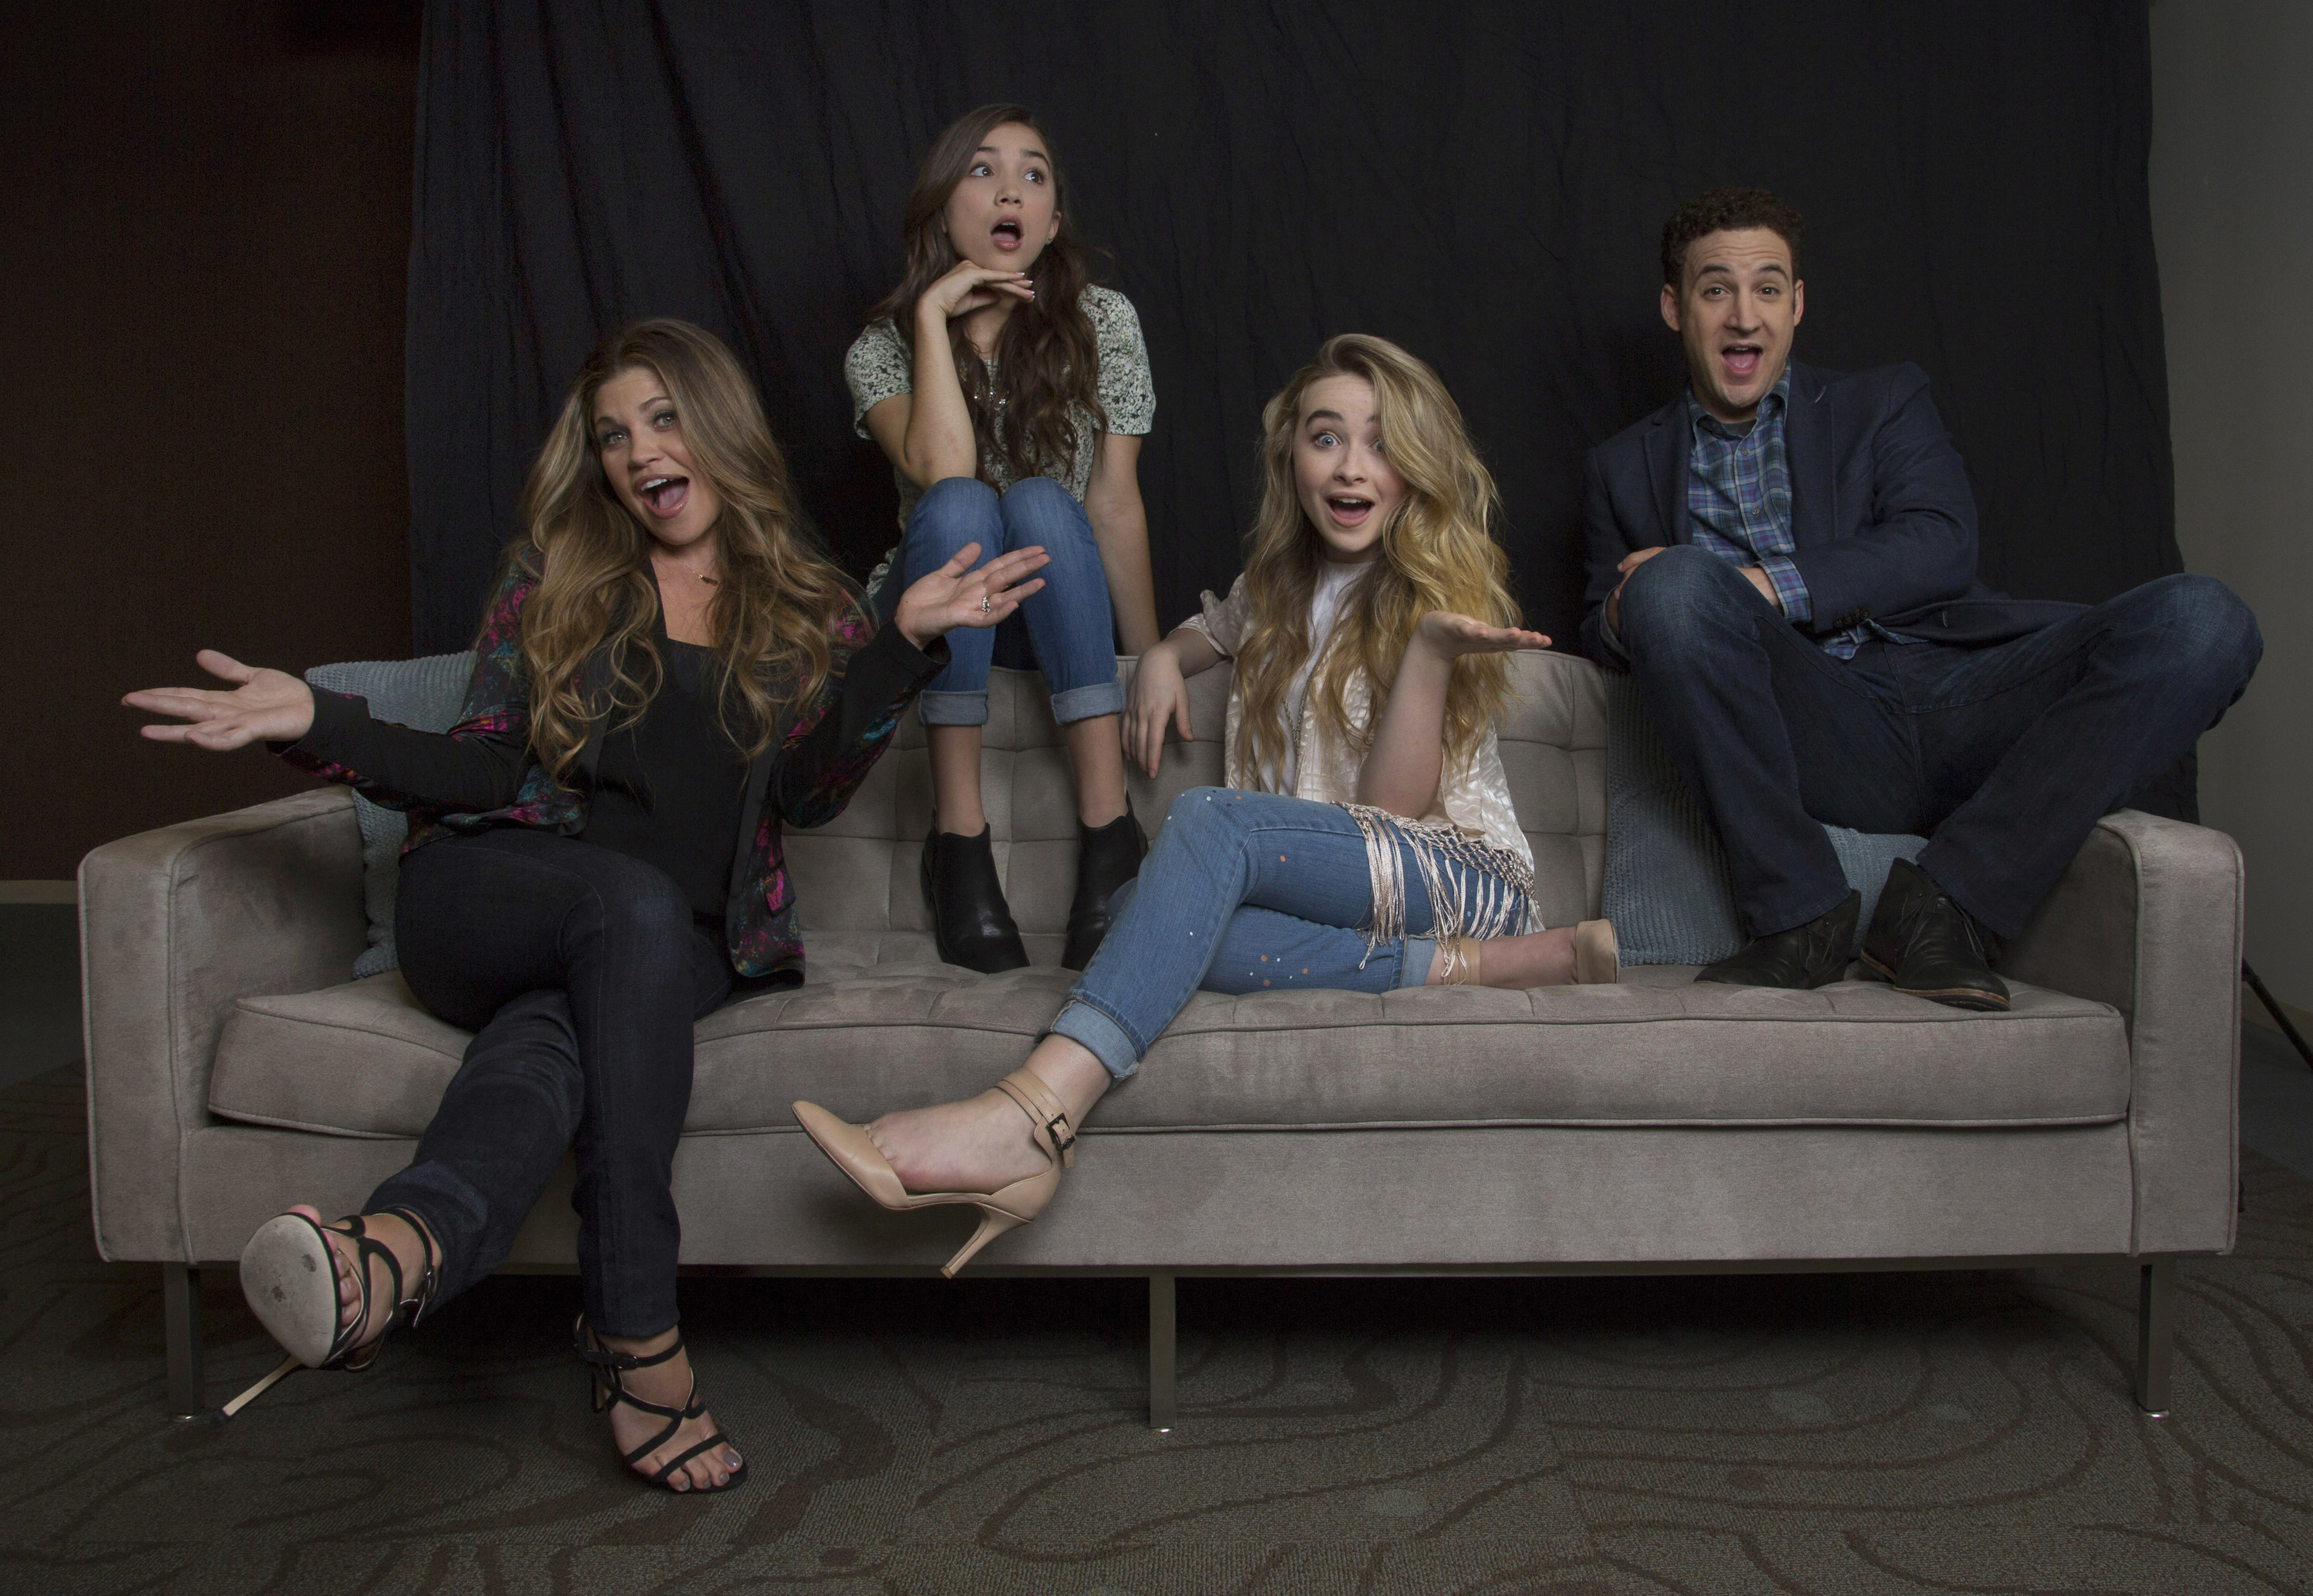 Cast members sitting together on a couch